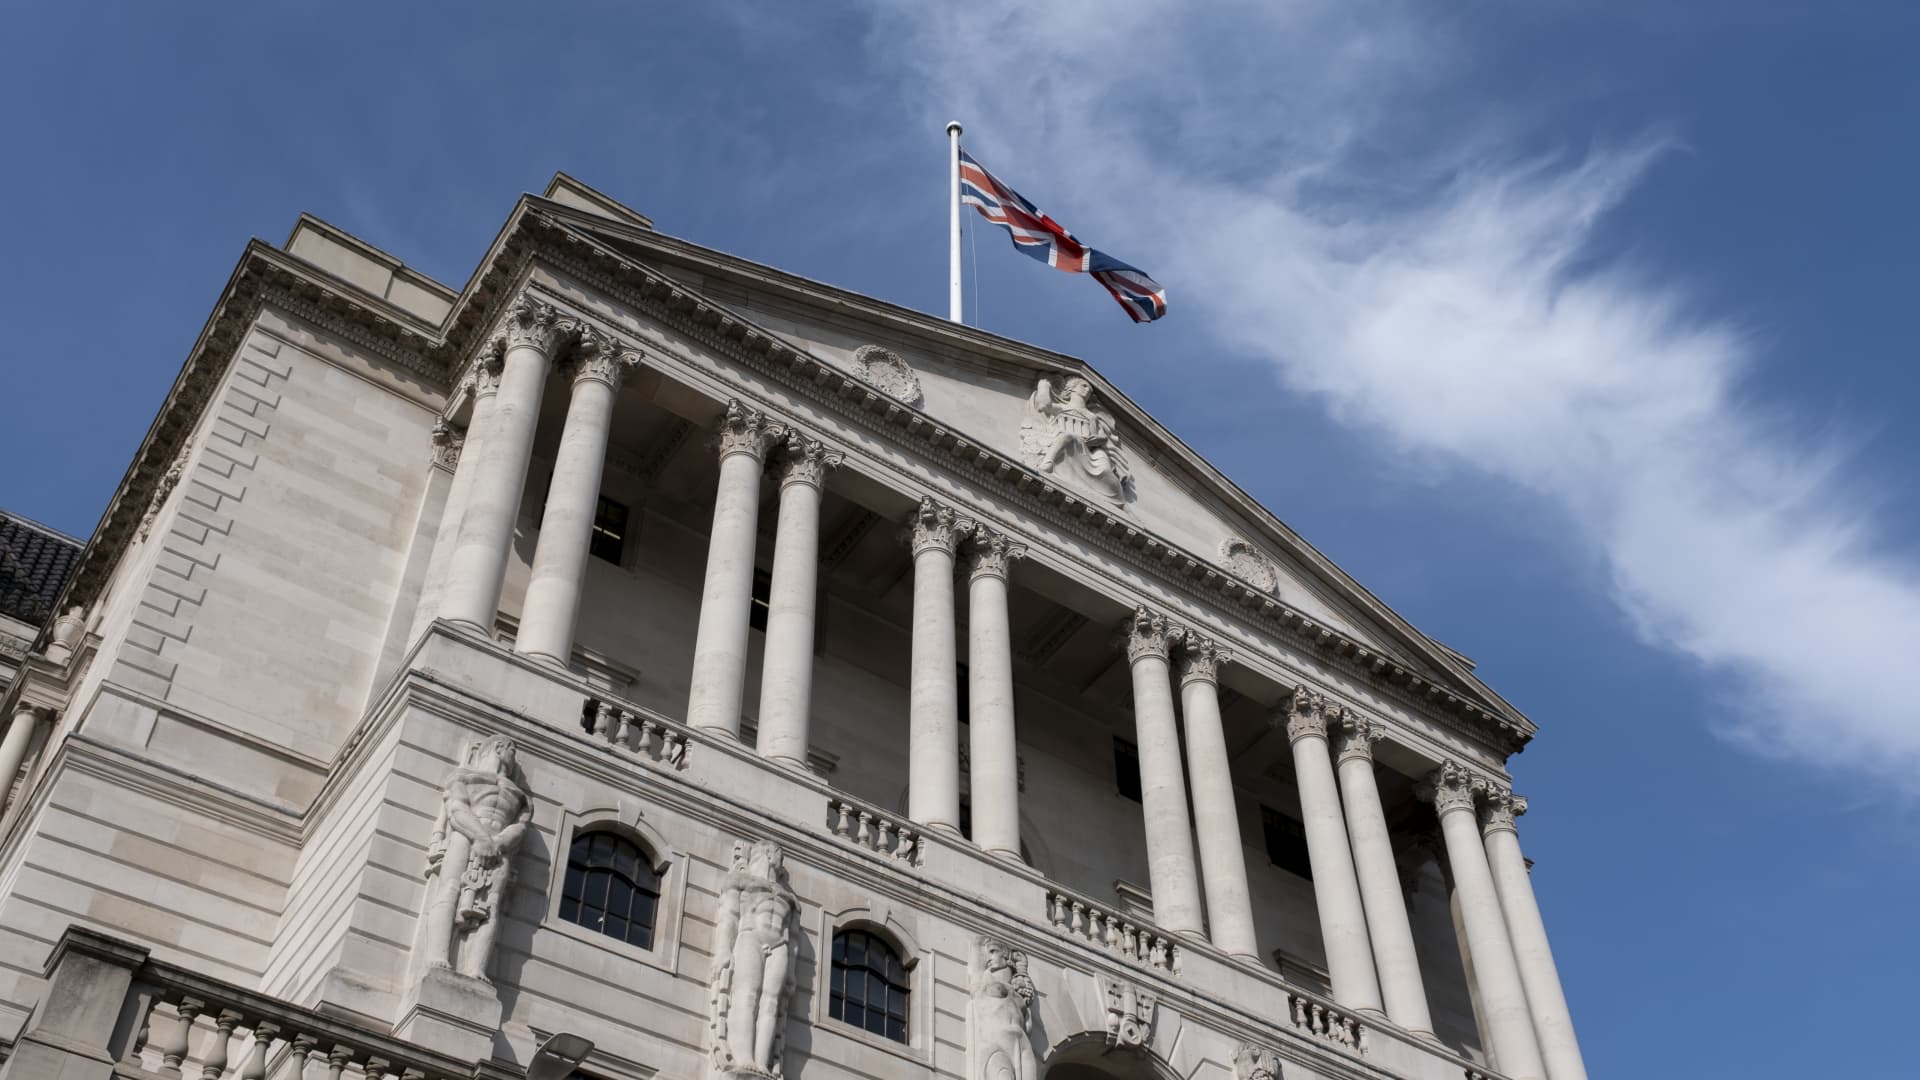 The exterior of the Bank of England in the City of London, United Kingdom.